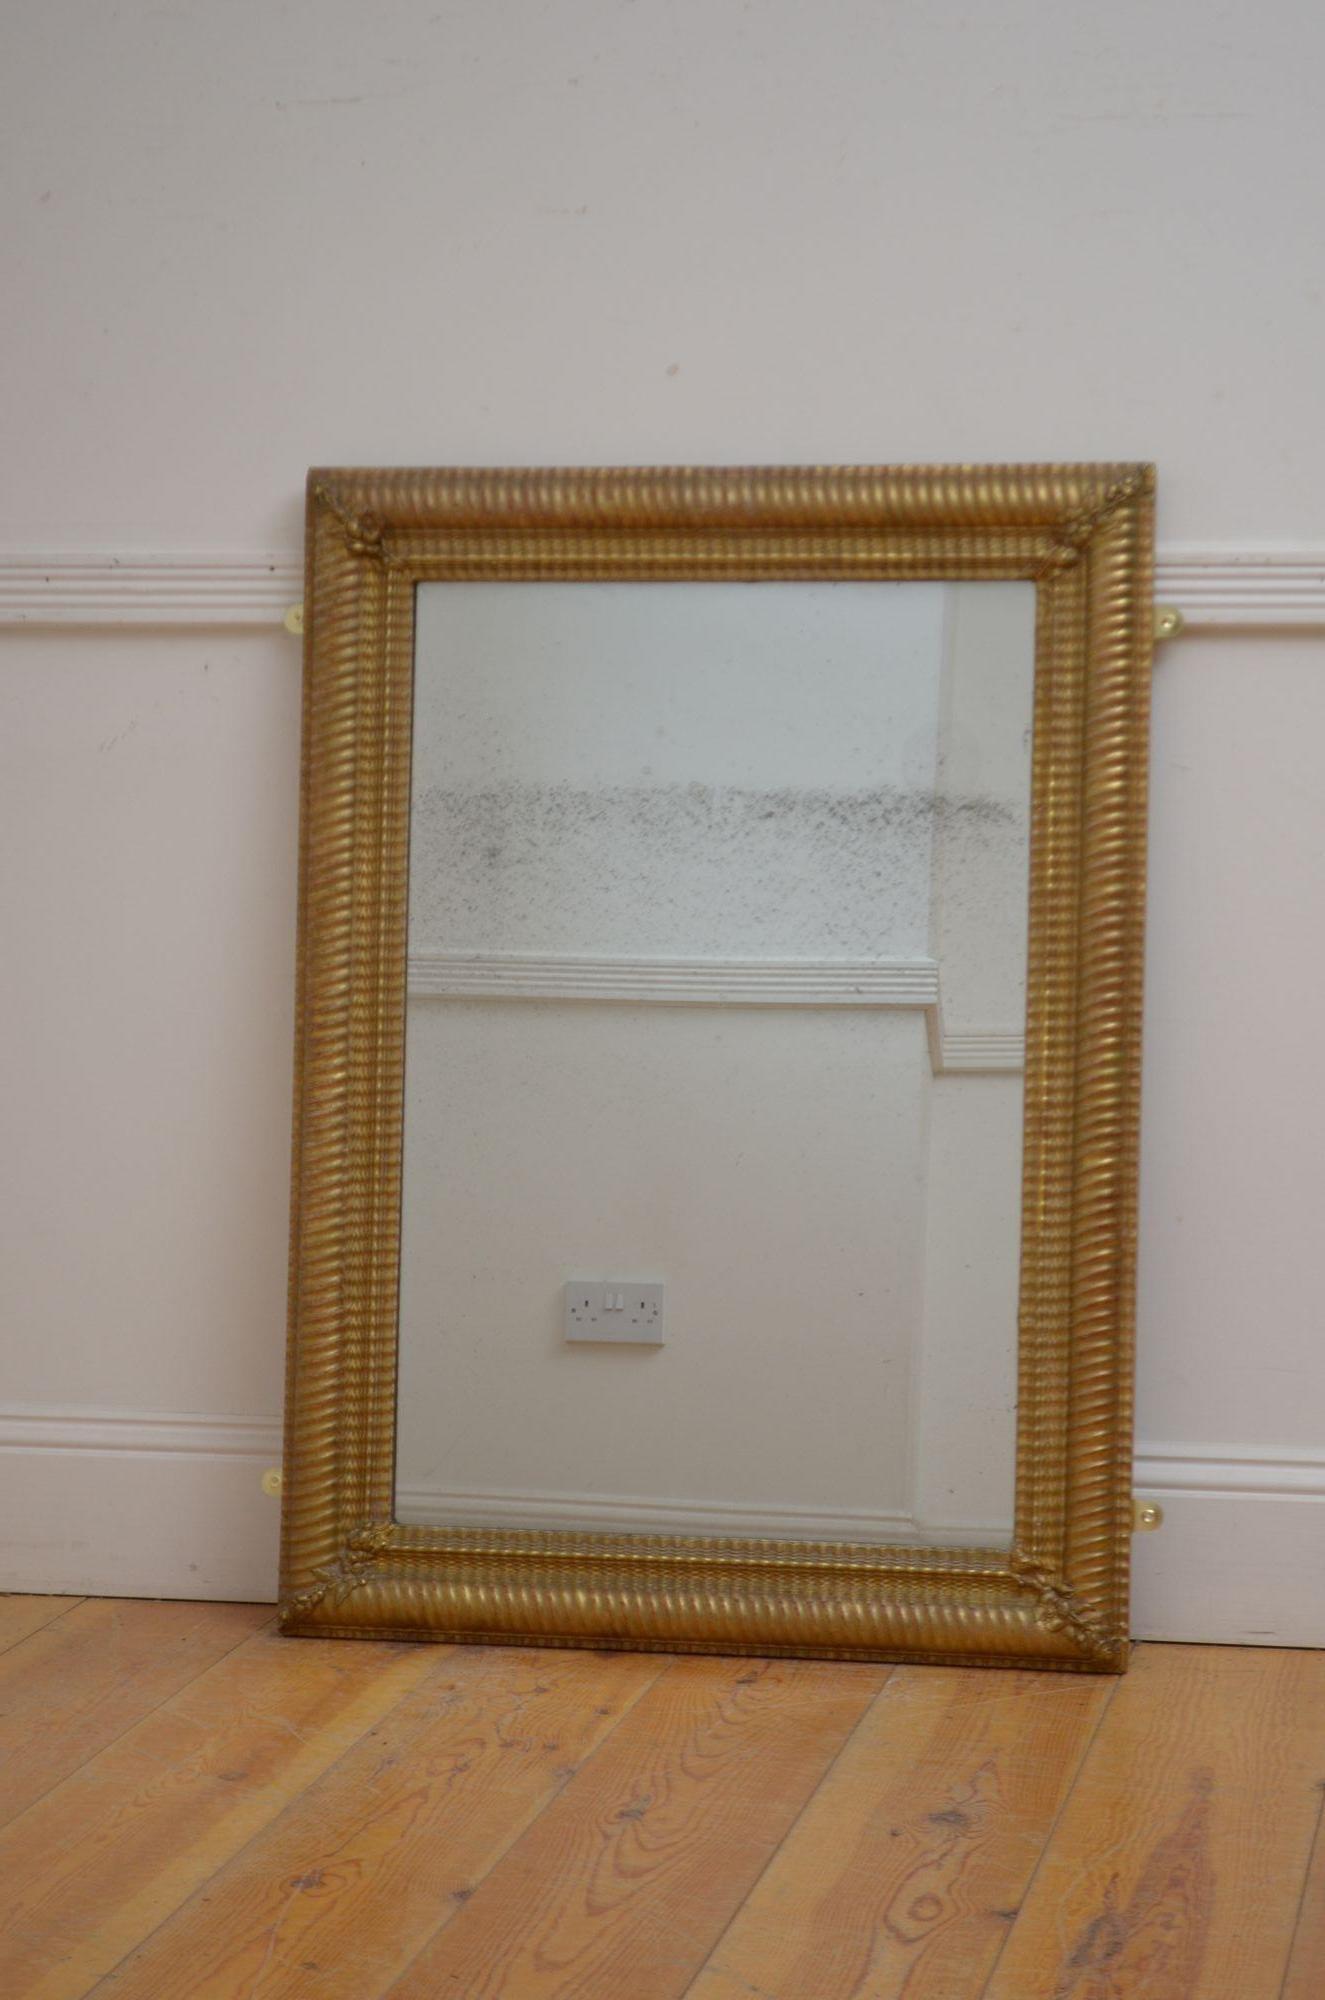 St051 Antique 19 century French giltwood Pier Mirror, having original foxed glass in moulded and gilded frame with ripple effect and floral motifs to each corner. this antique mirror can be positioned portrait or landscape. This mirror retains its